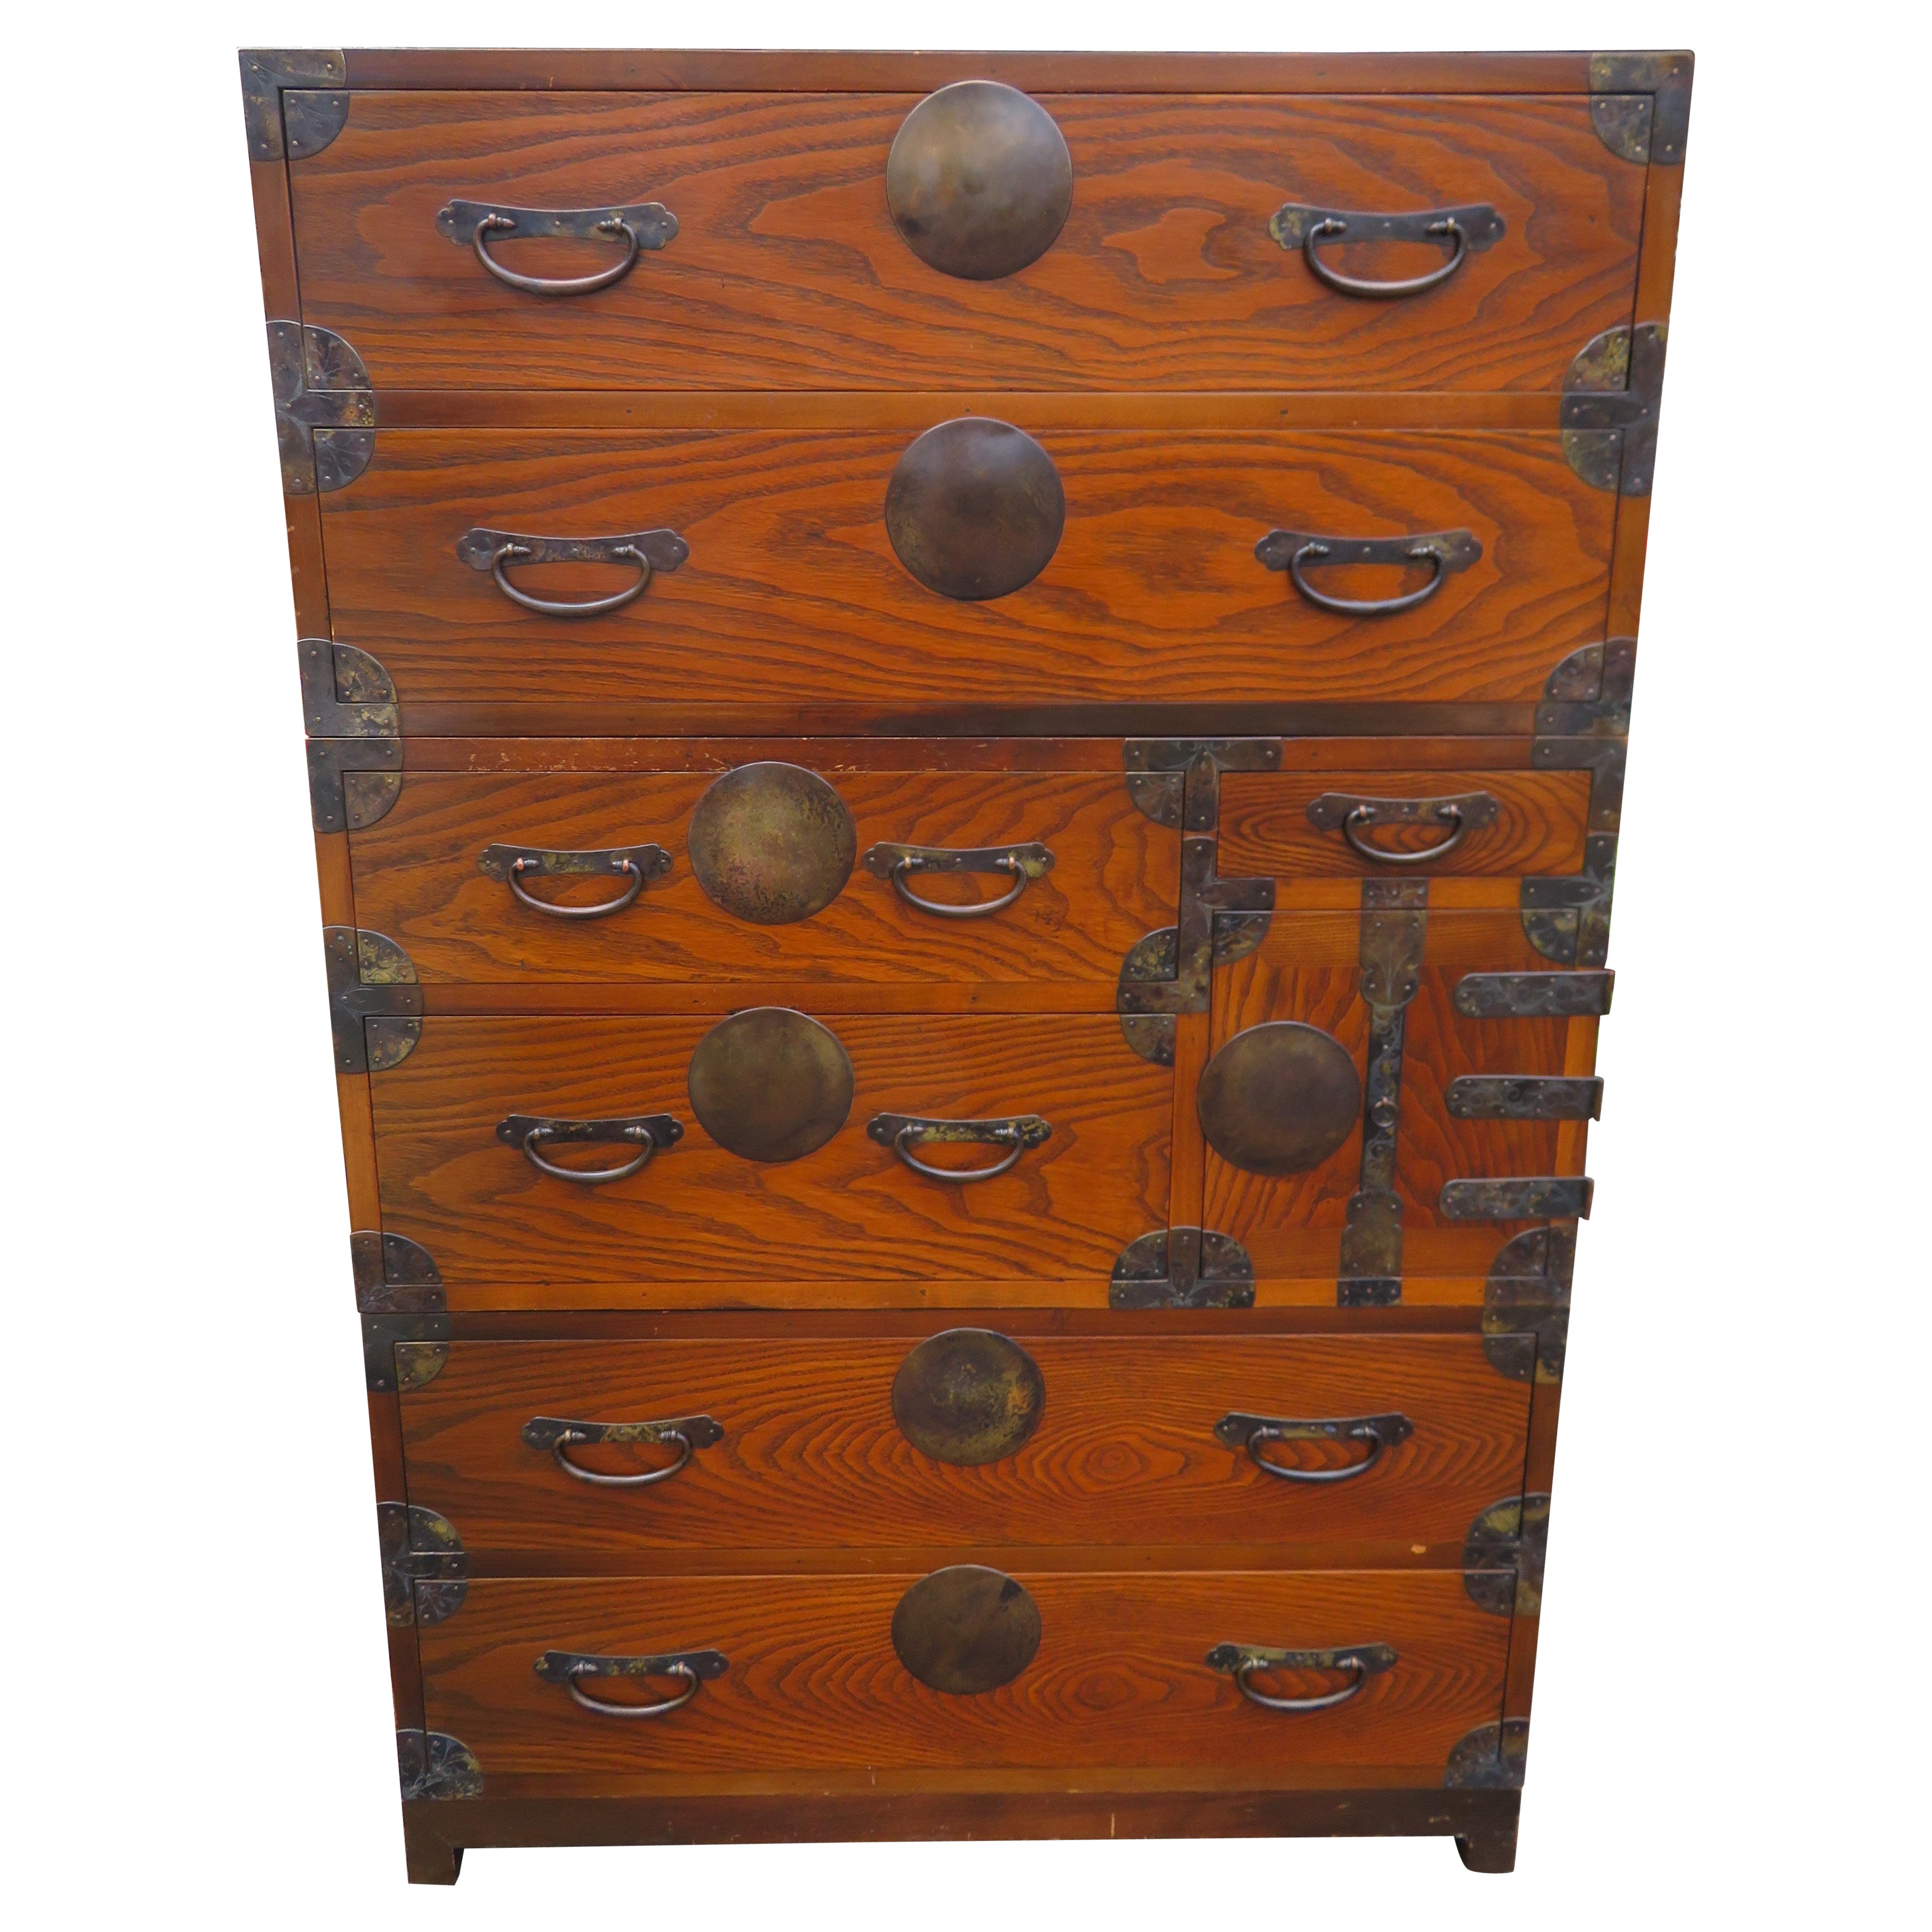 3 Fabulous 20th Century Japanese style Stacking Tansu Chest of Drawers